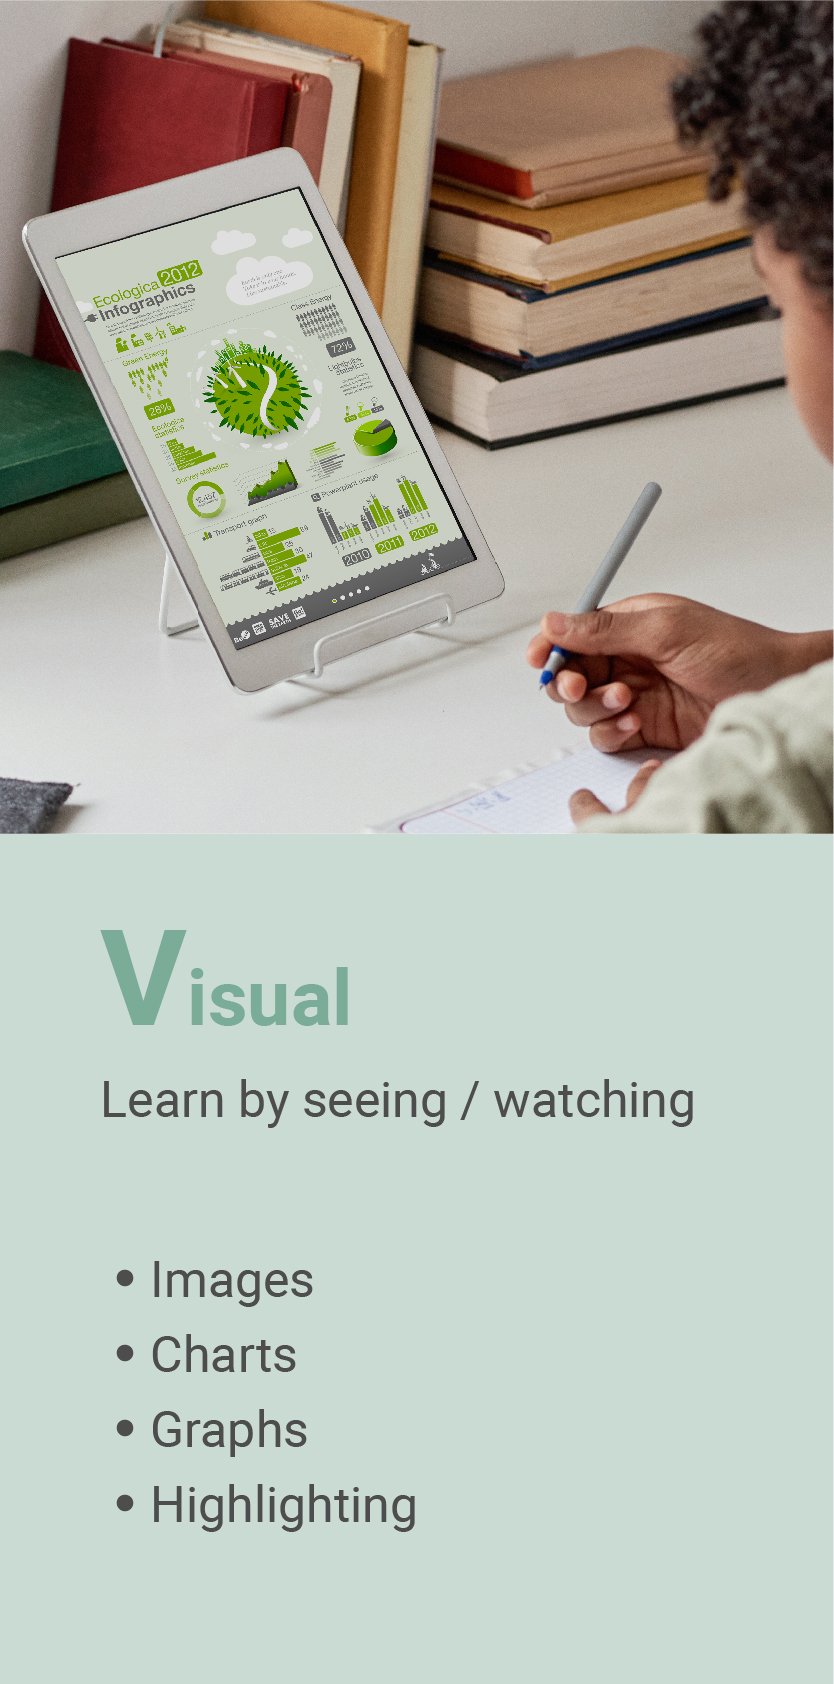 Different types of learners: Visual learners - learn by seeing and watching